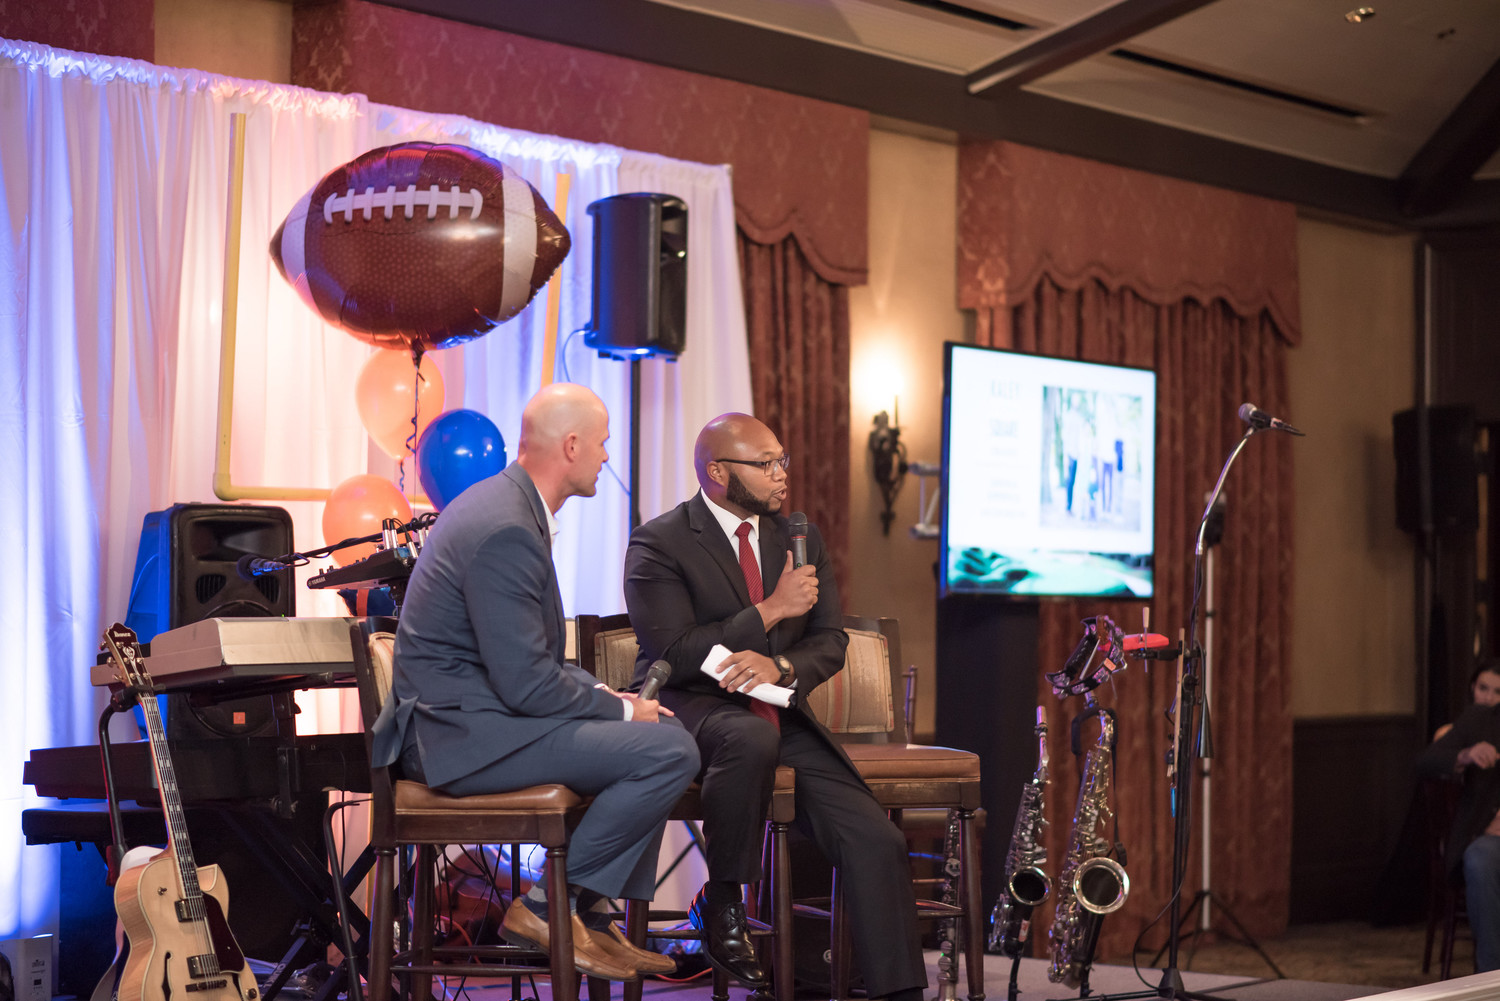 Danny Wuerffel interviews Demetrius Summerville, executive director of Kaley Square in Orlando (Desire Street Ministry partner), during the dinner Thursday evening.